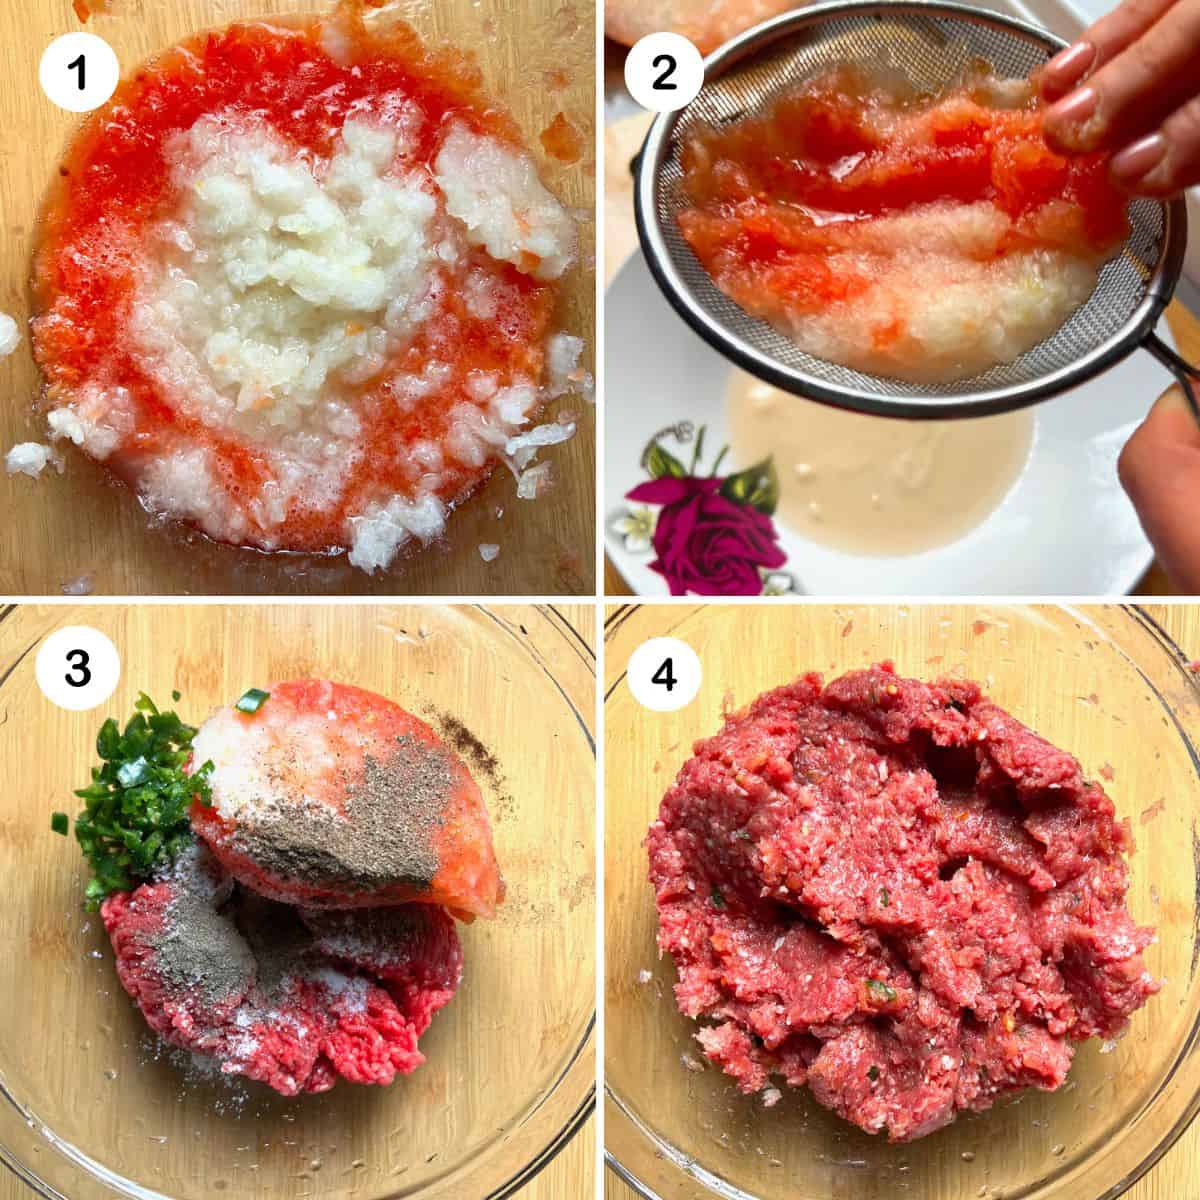 Steps for preparing tomato meat mixture